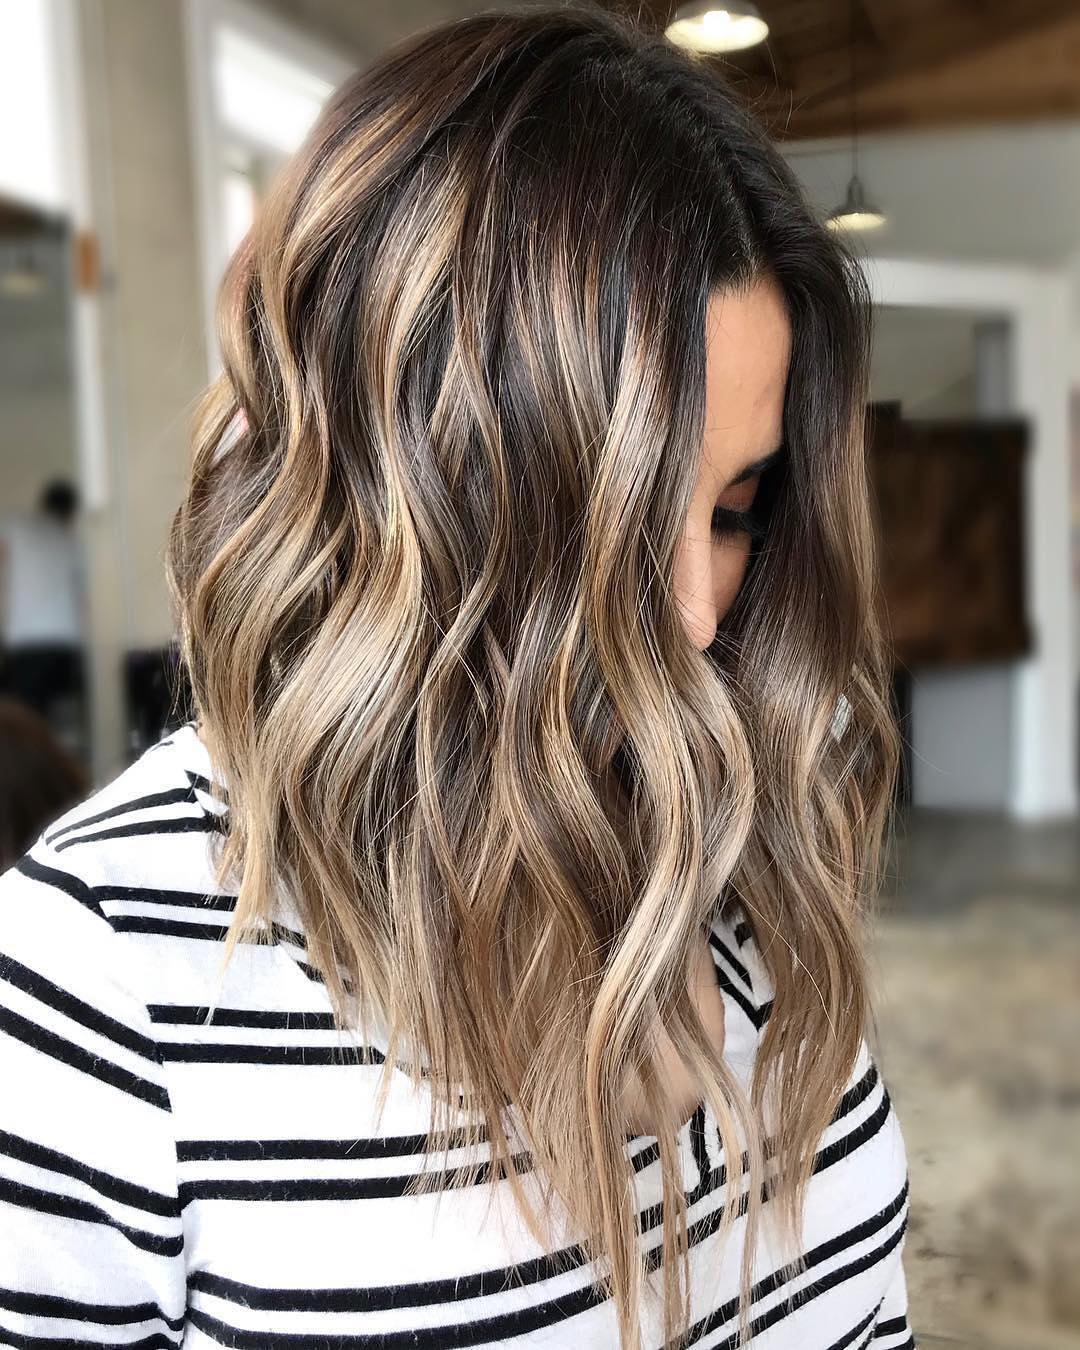 2018 Ombre Balayage Hairstyles For Chic Mid Length Hair ! 6